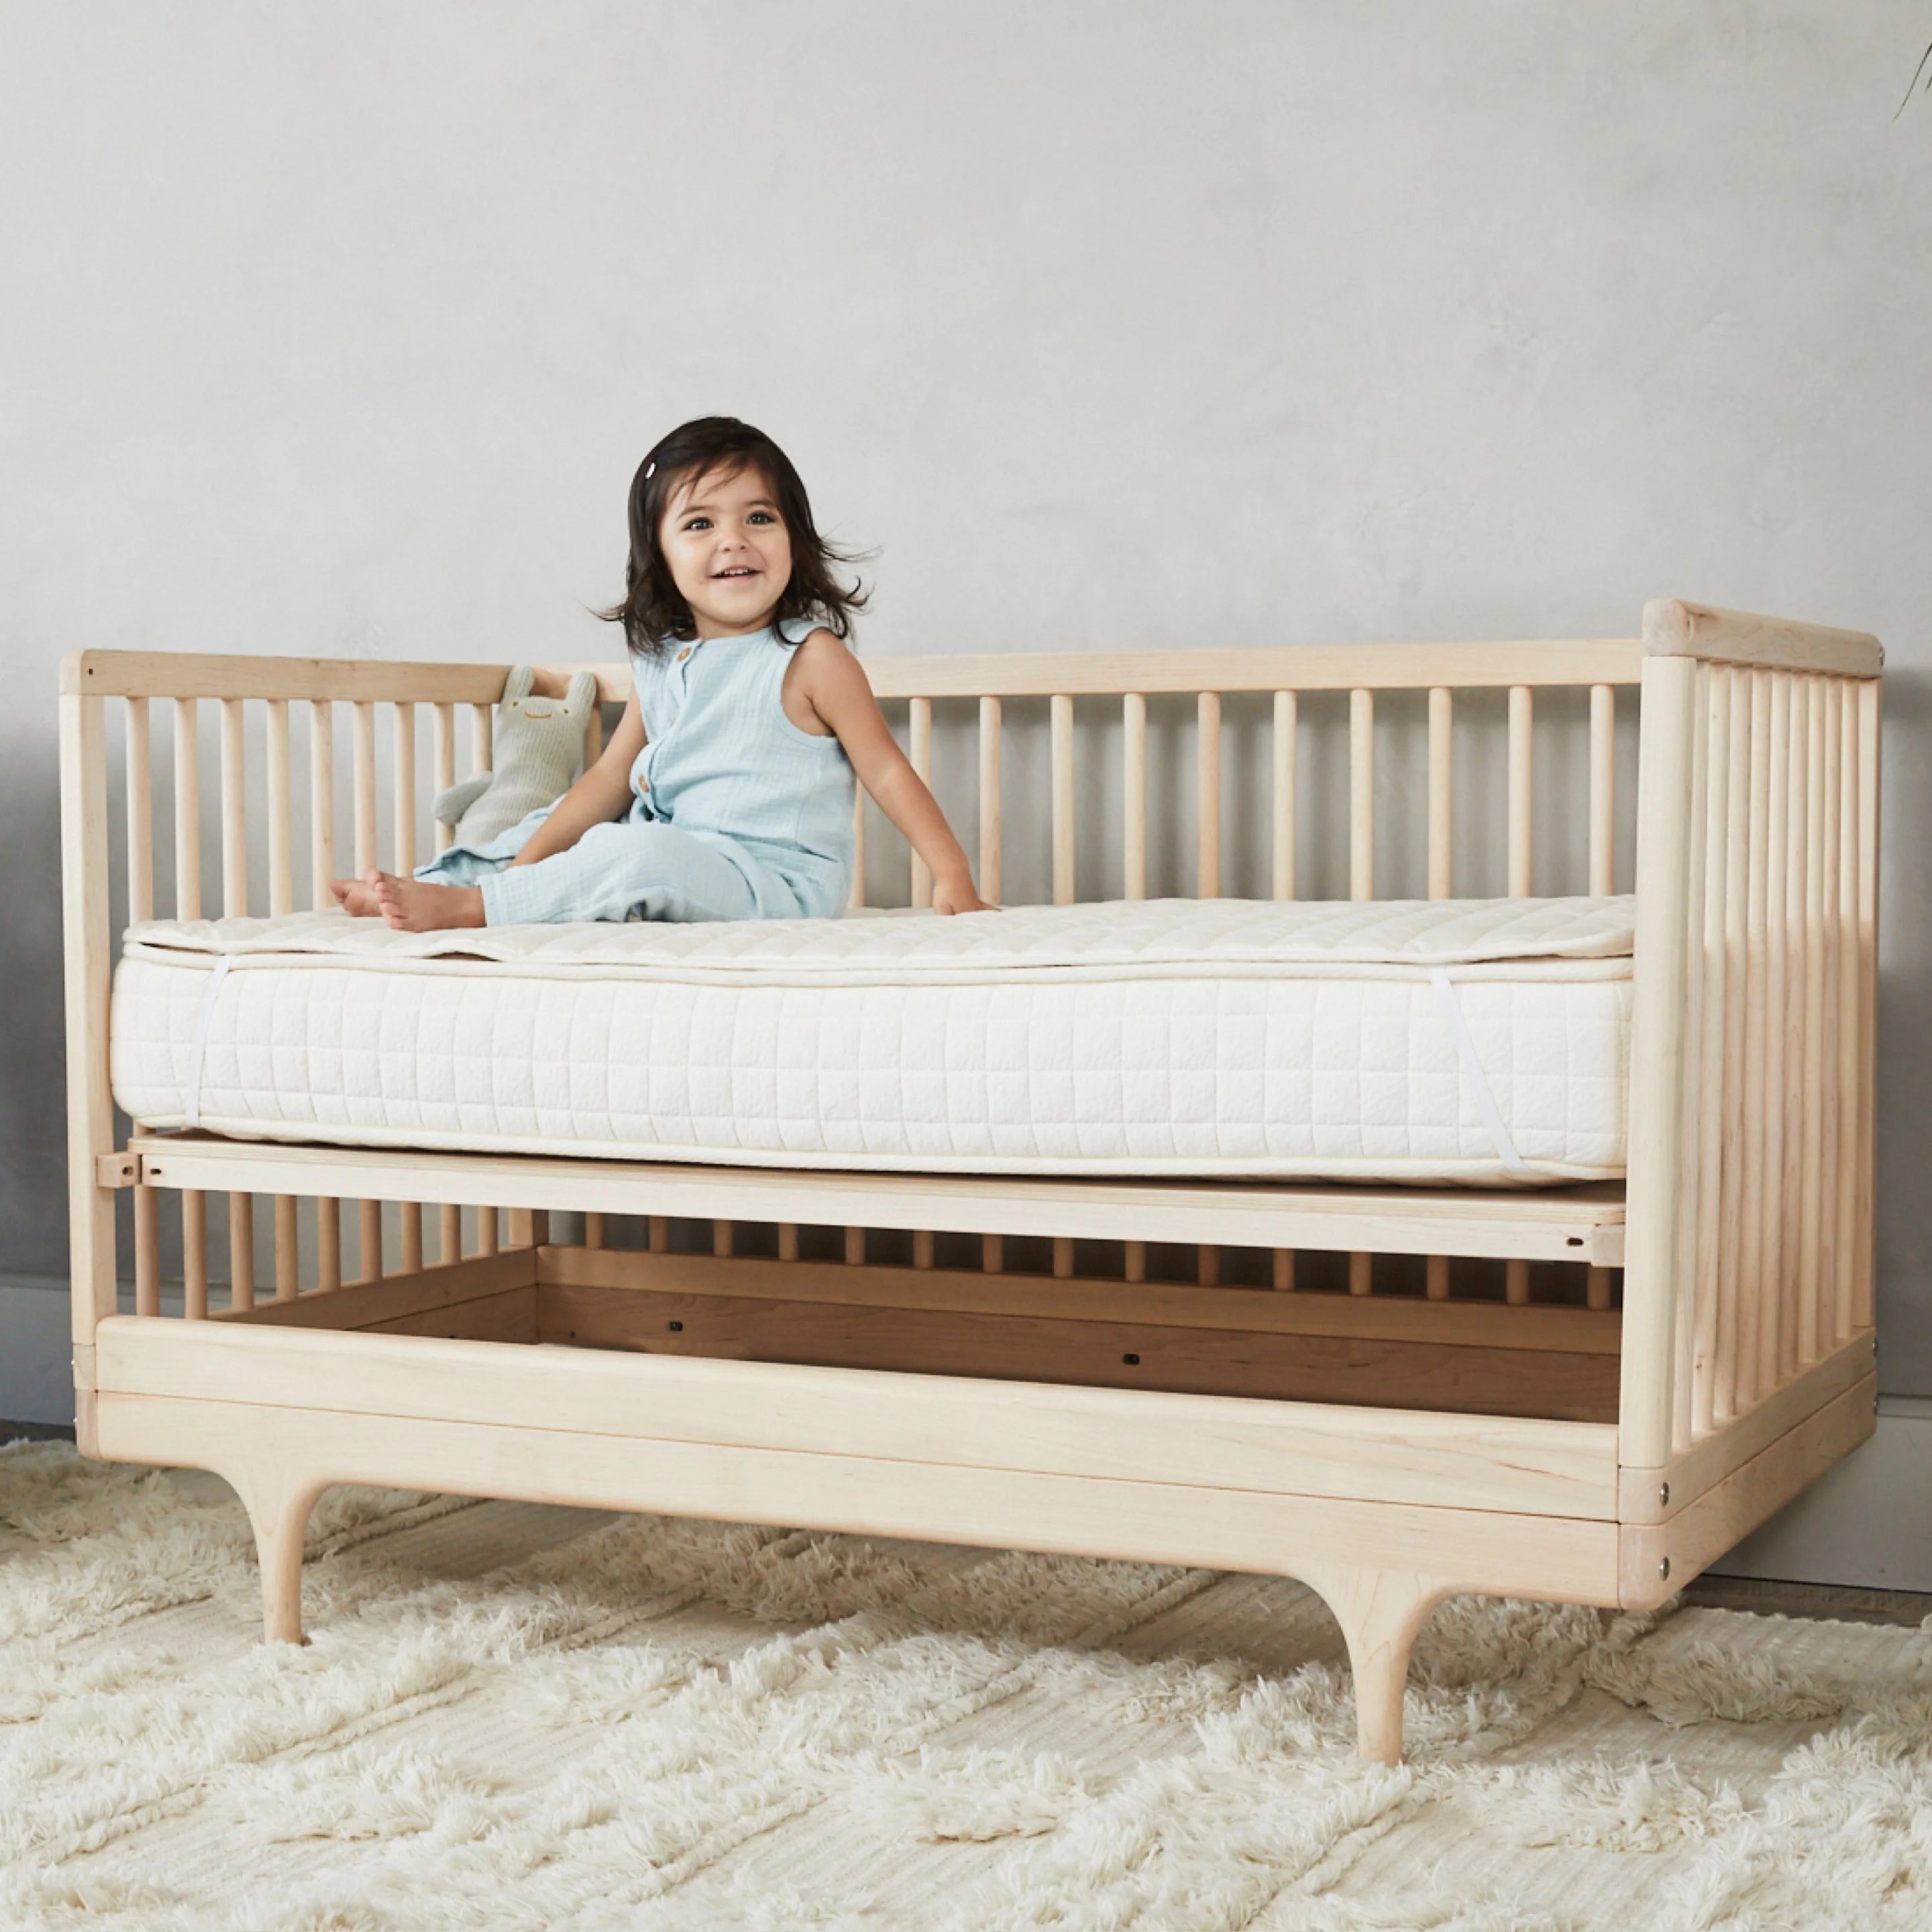 10 Best Crib Mattress Options for Your Little One